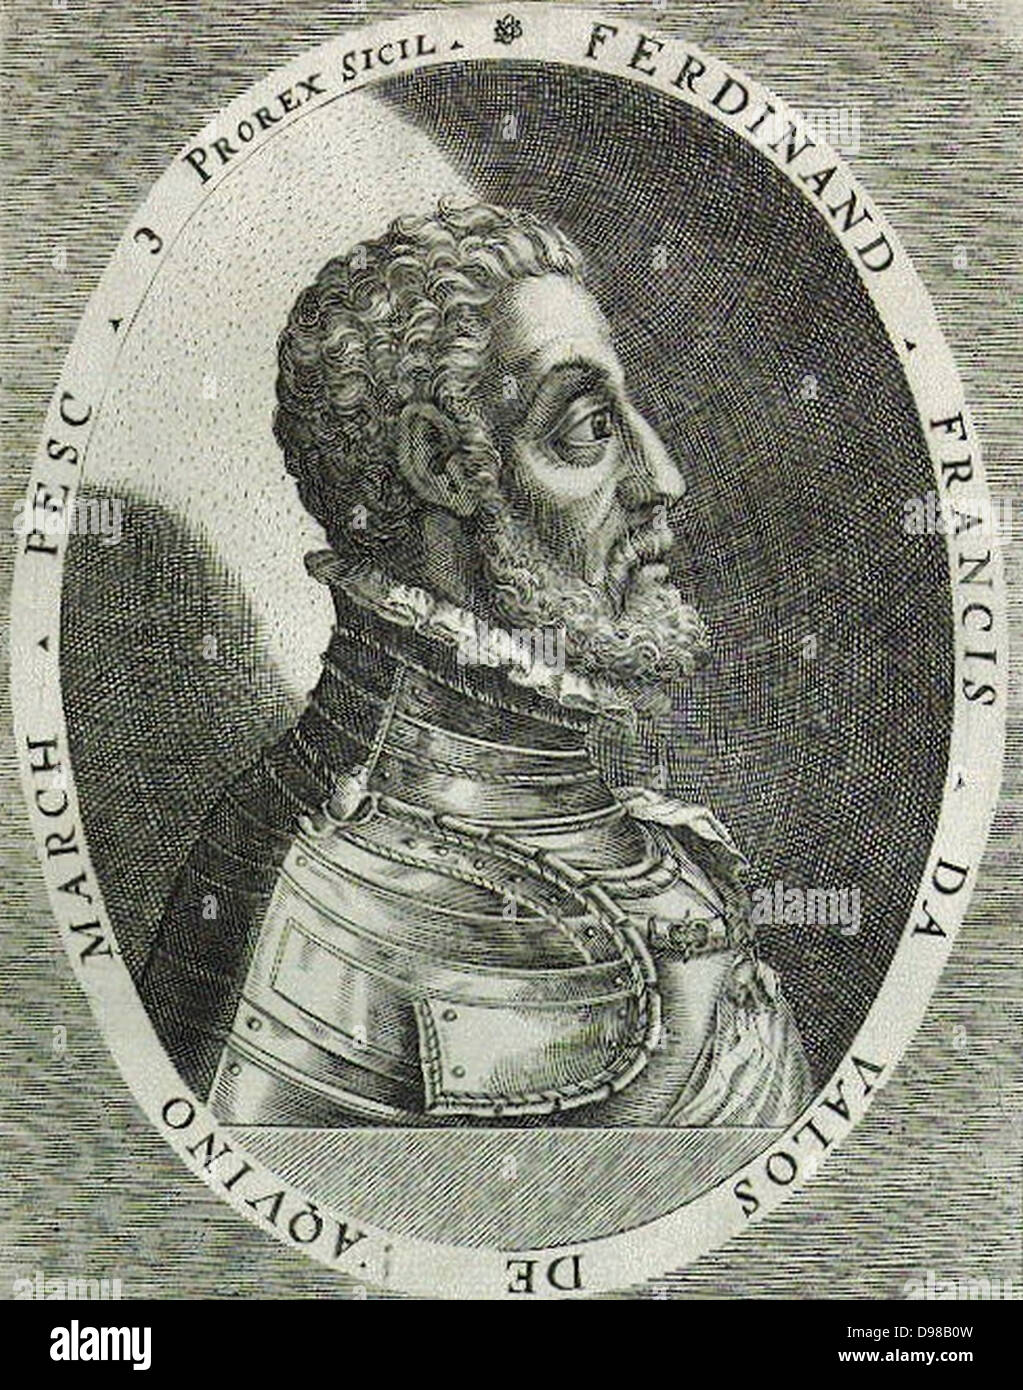 Fernando Francesco d'Ávalos, Marquess of Pescara, (1489 – December 1525) was an Italian condottiero. General of the Spanish army, in the Italian Wars. At the Battle of Ravenna in 1512 he was taken prisoner by the French, but was released at the conclusion of the War of the League of Cambrai. He was the chief commander of the Habsburg armies in Italy during the Habsburg-Valois Wars. Stock Photo